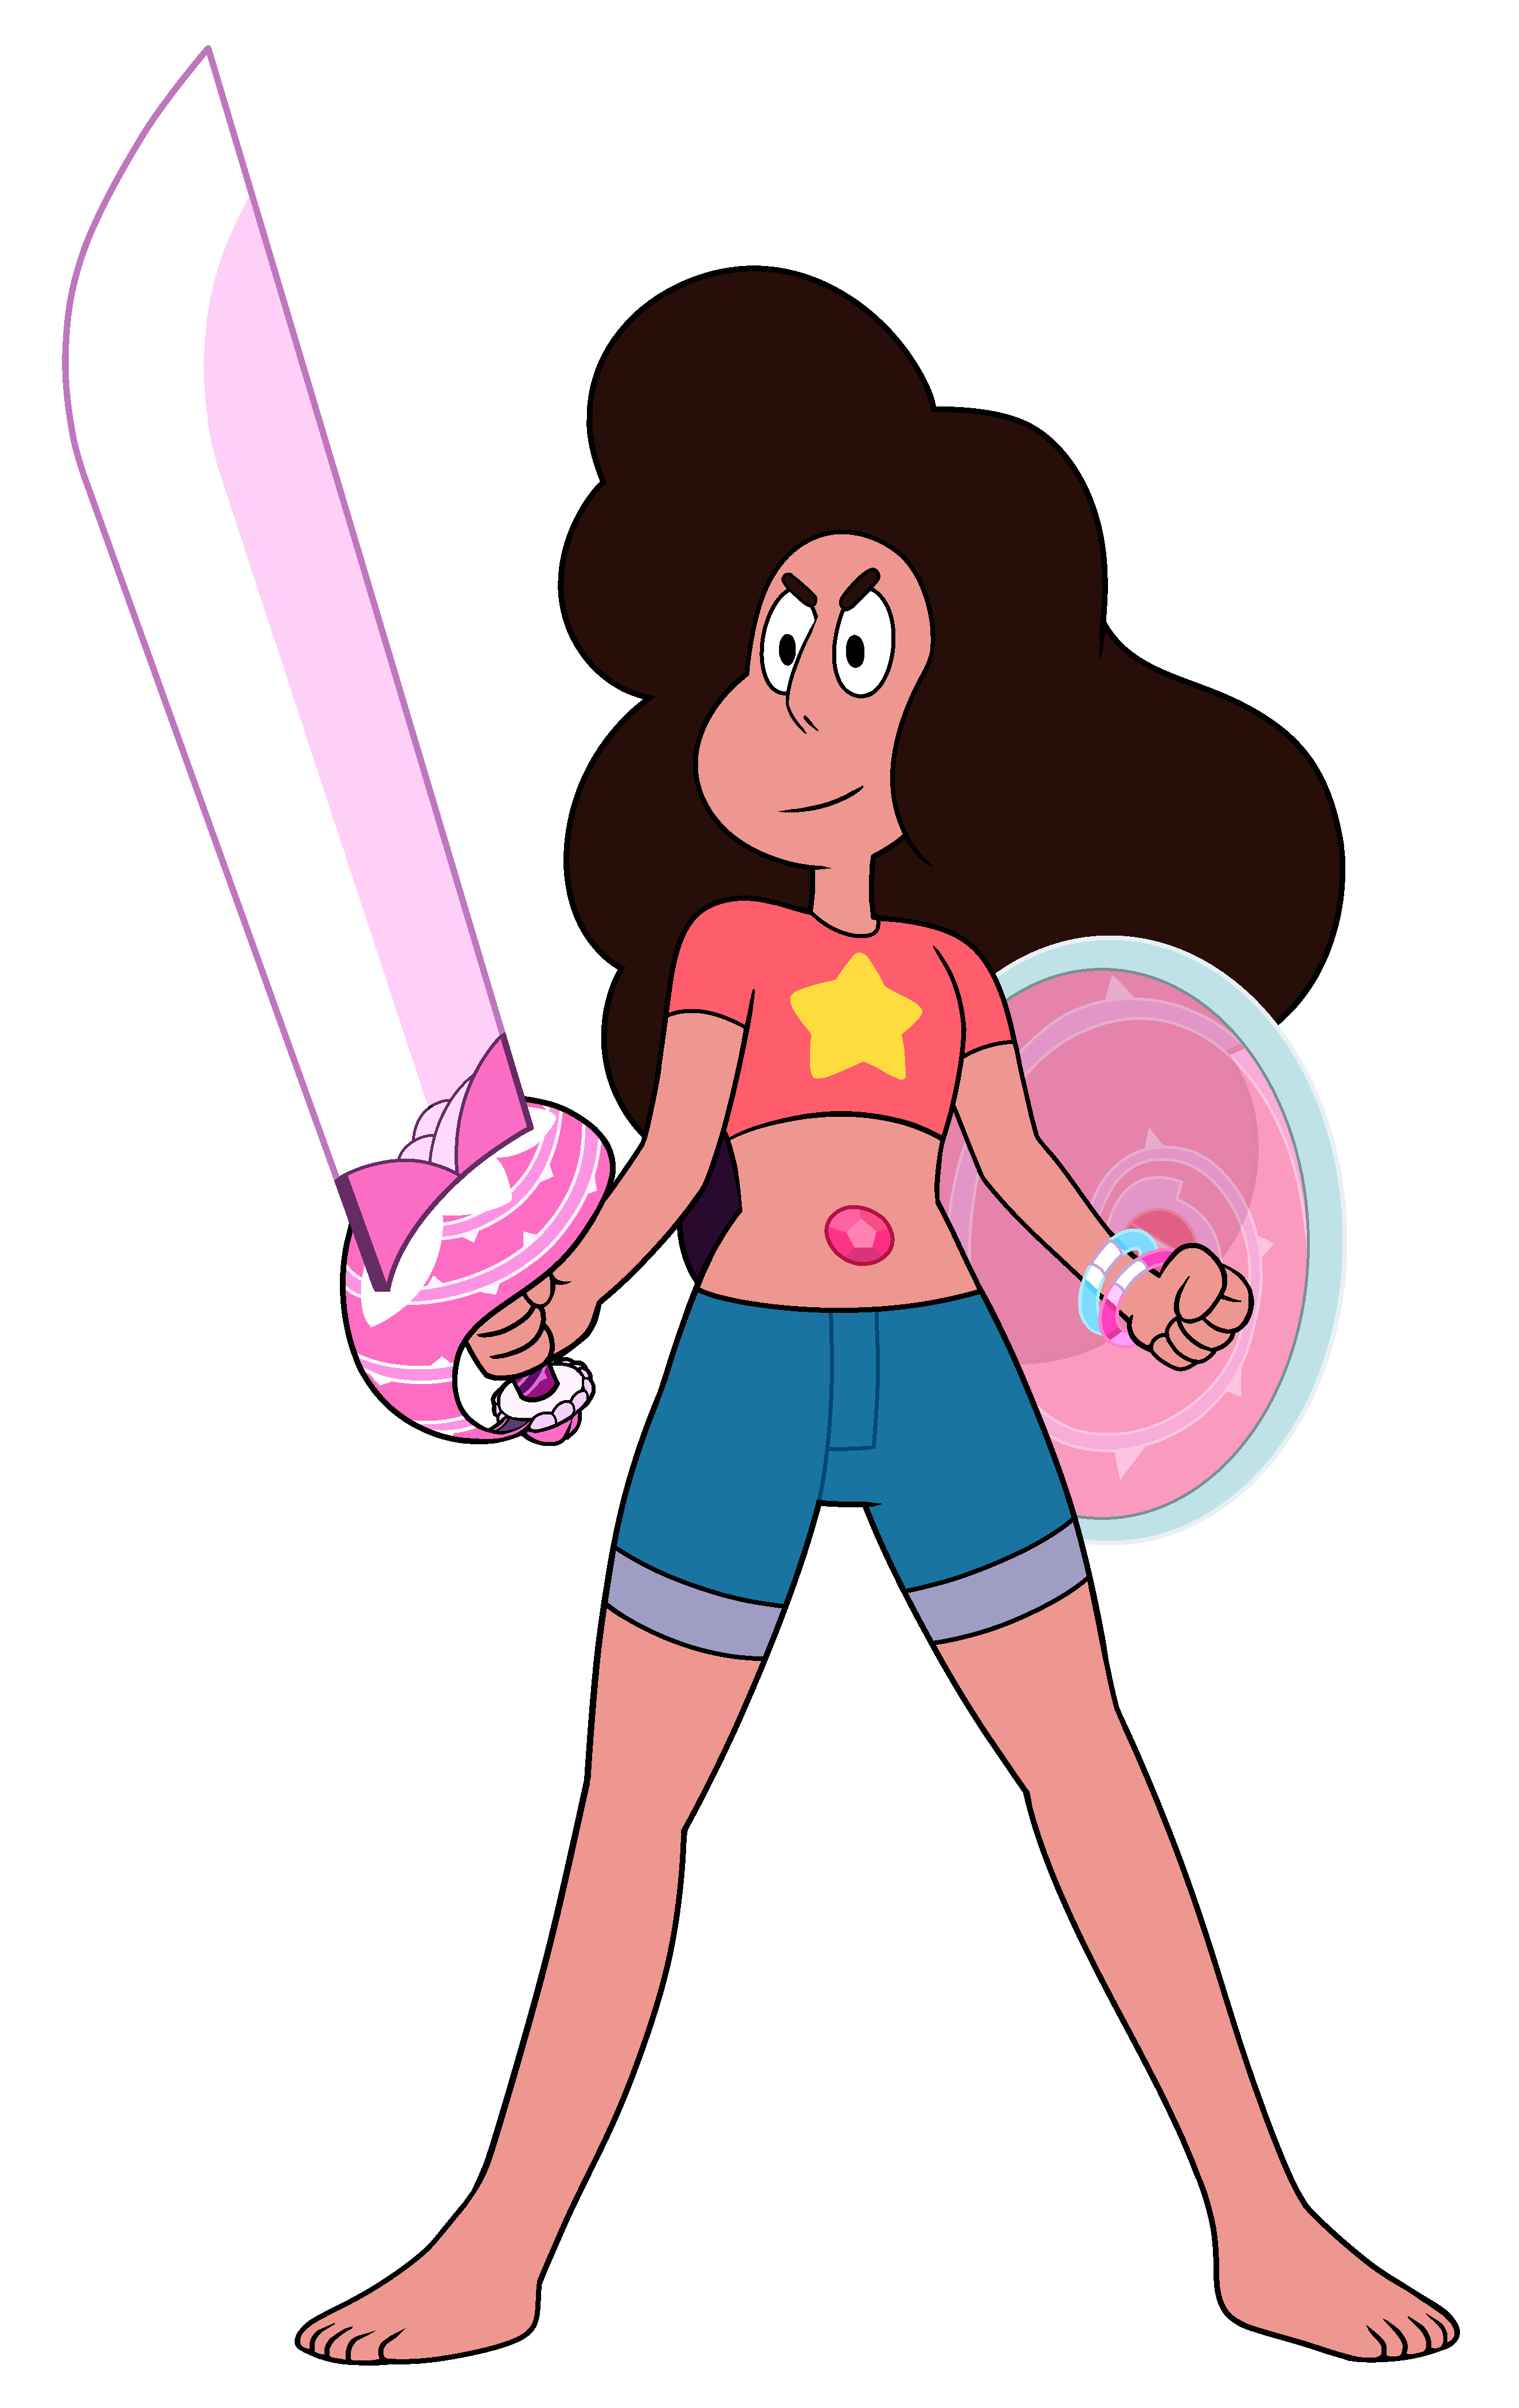 http://vignette4.wikia.nocookie.net/steven-universe/images/c/c3/Stevonnie_with_Sword_and_Shield_by_Lenhi.png/revision/latest?cb=20160803234314